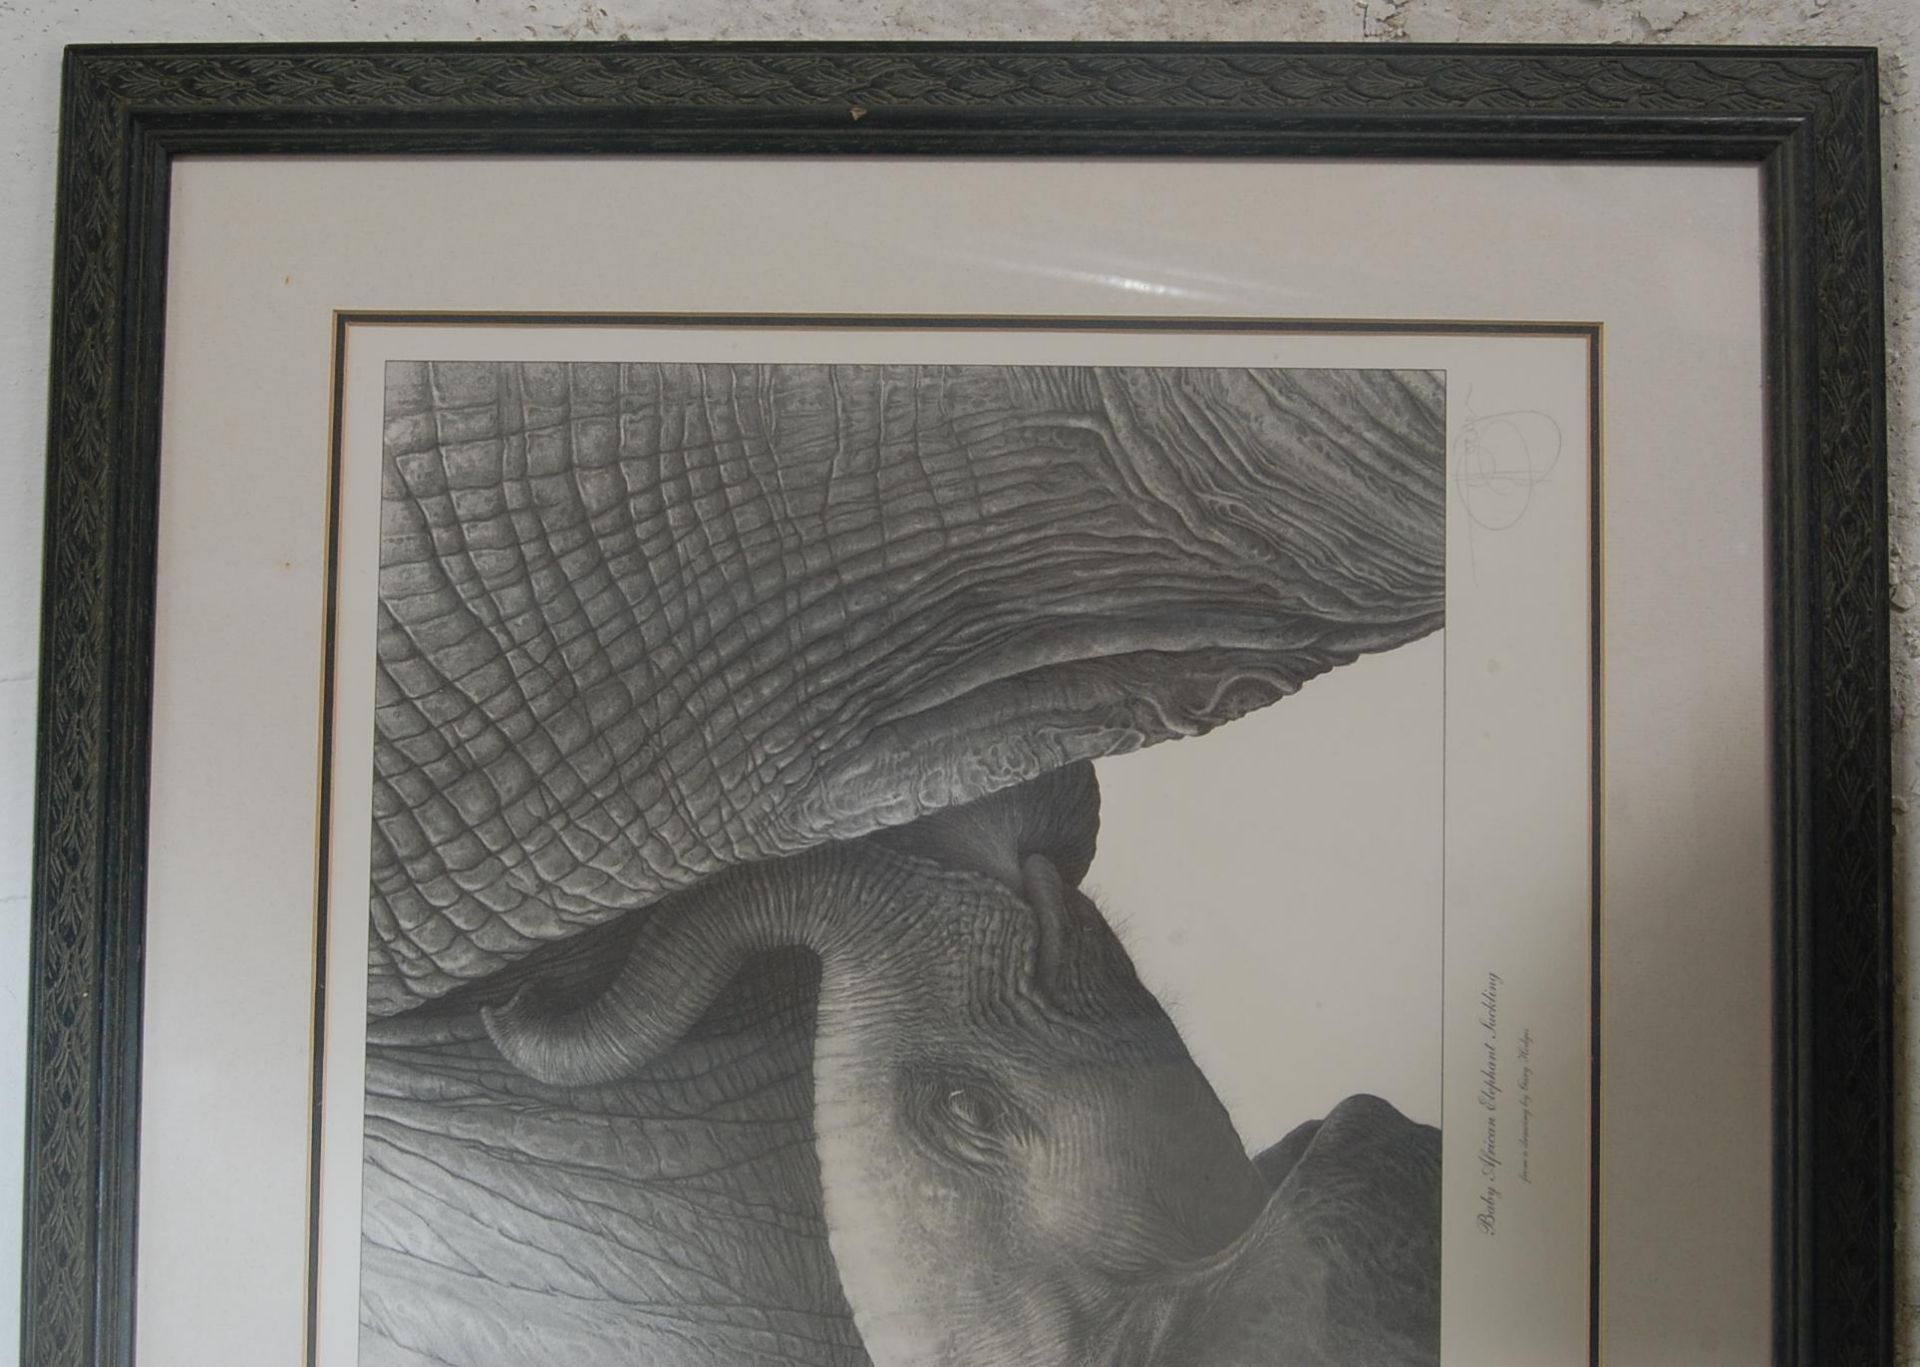 Gary Hodges (1954-) A retro vintage limited edition signed print of a pencil drawing of two - Image 4 of 5